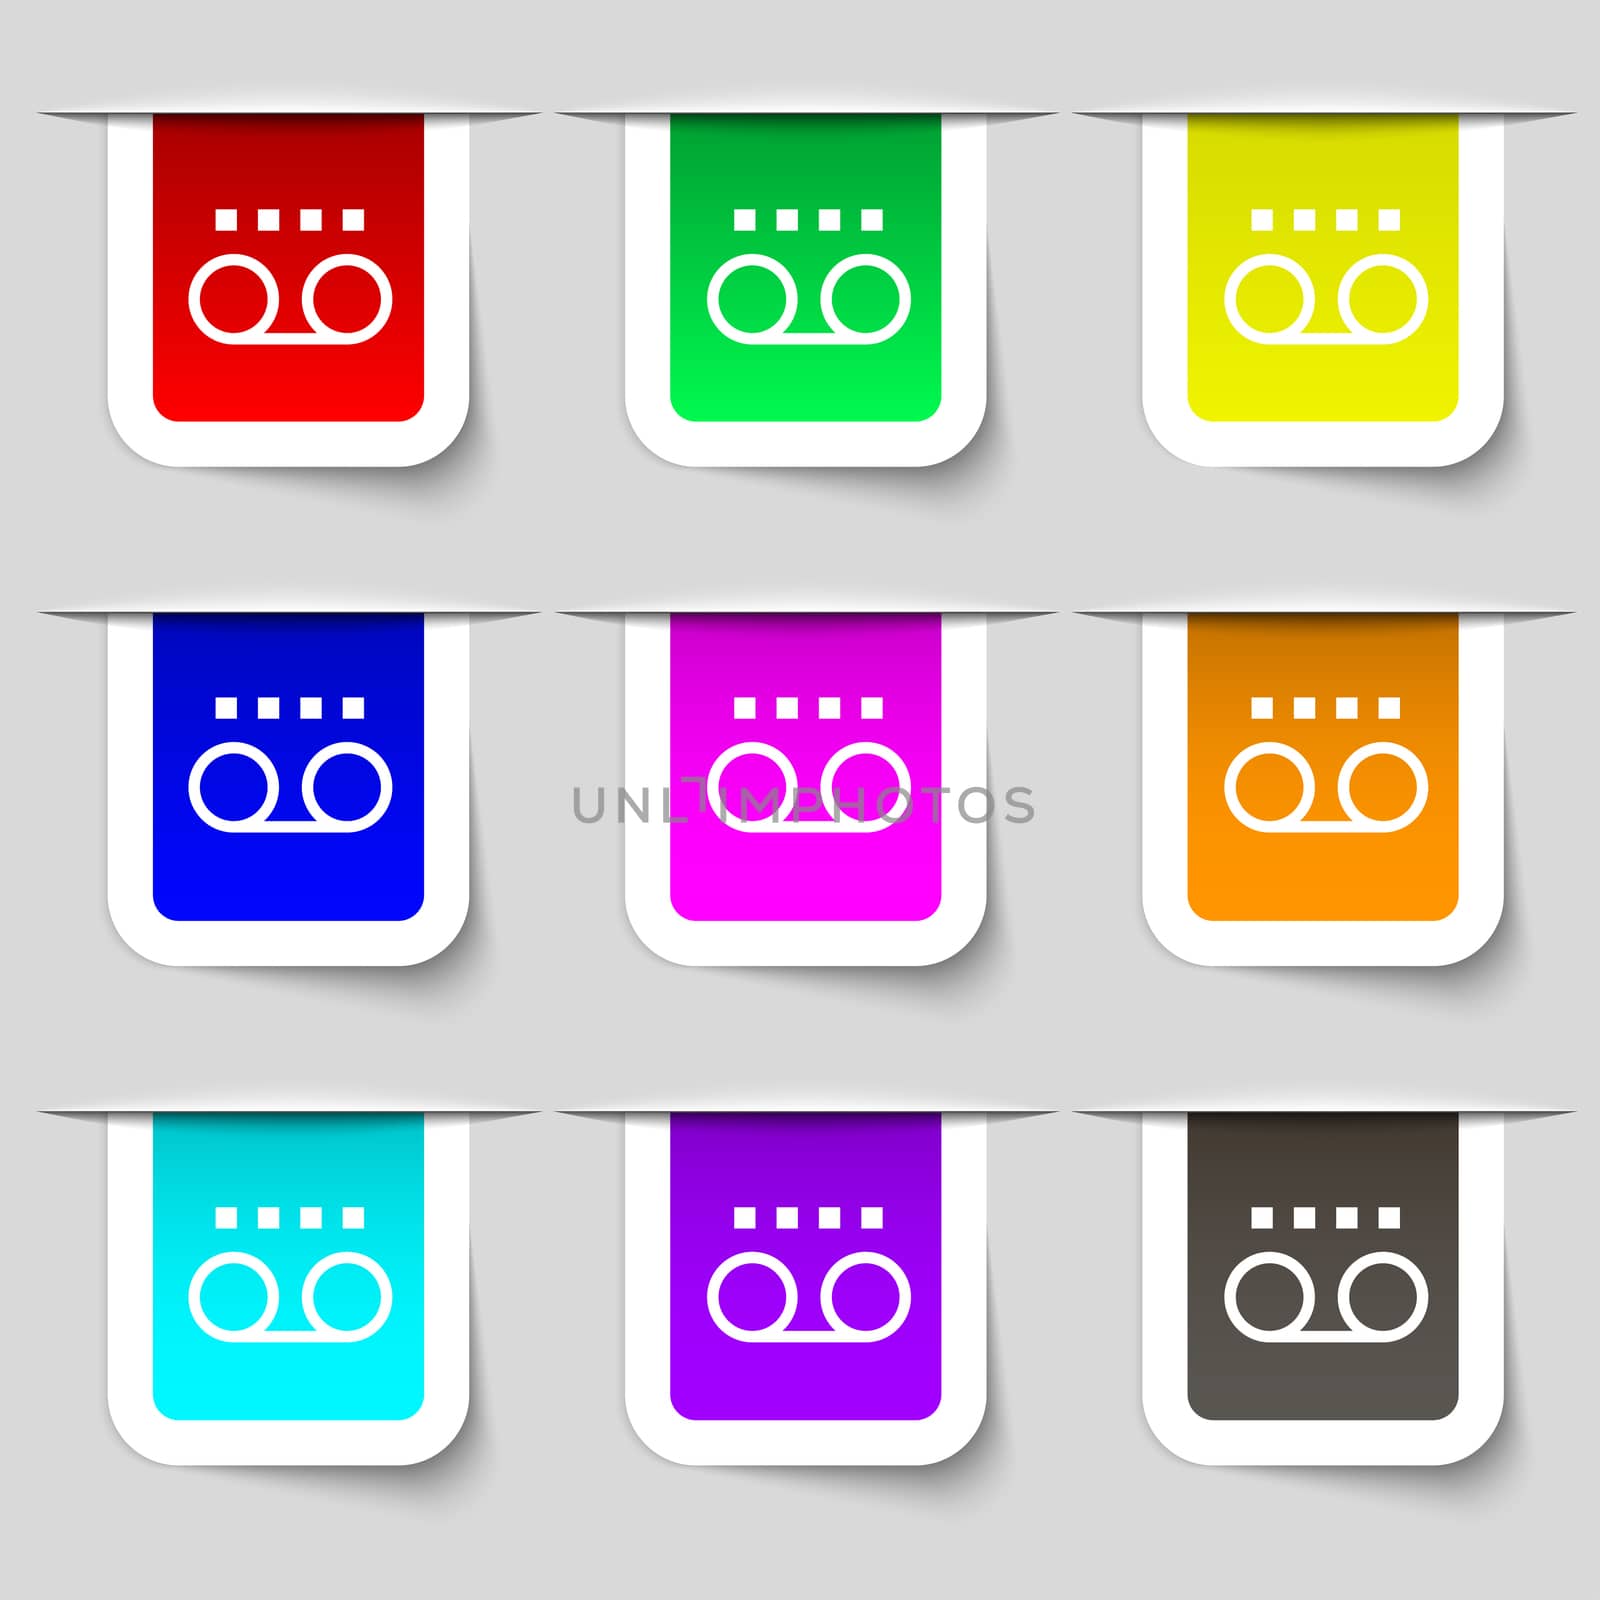 audio cassette icon sign. Set of multicolored modern labels for your design. illustration